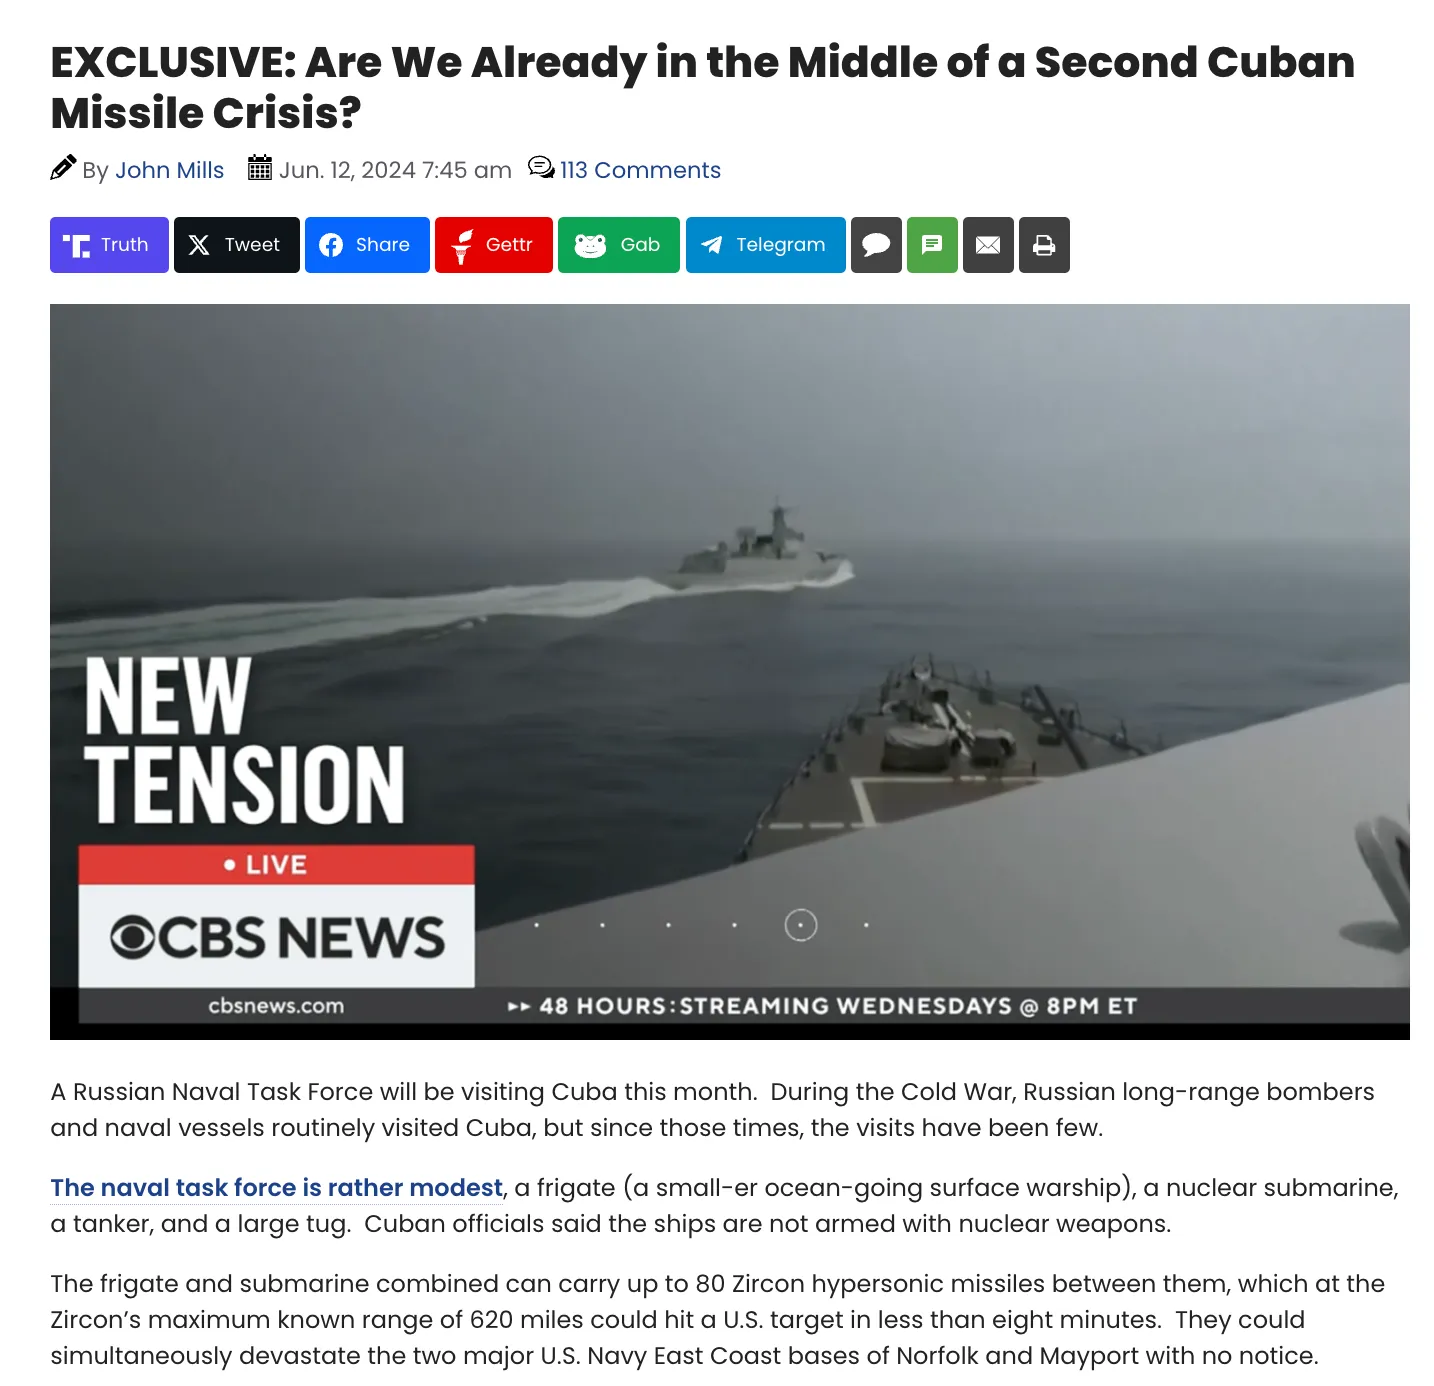 Chinese Missiles In Cuba?